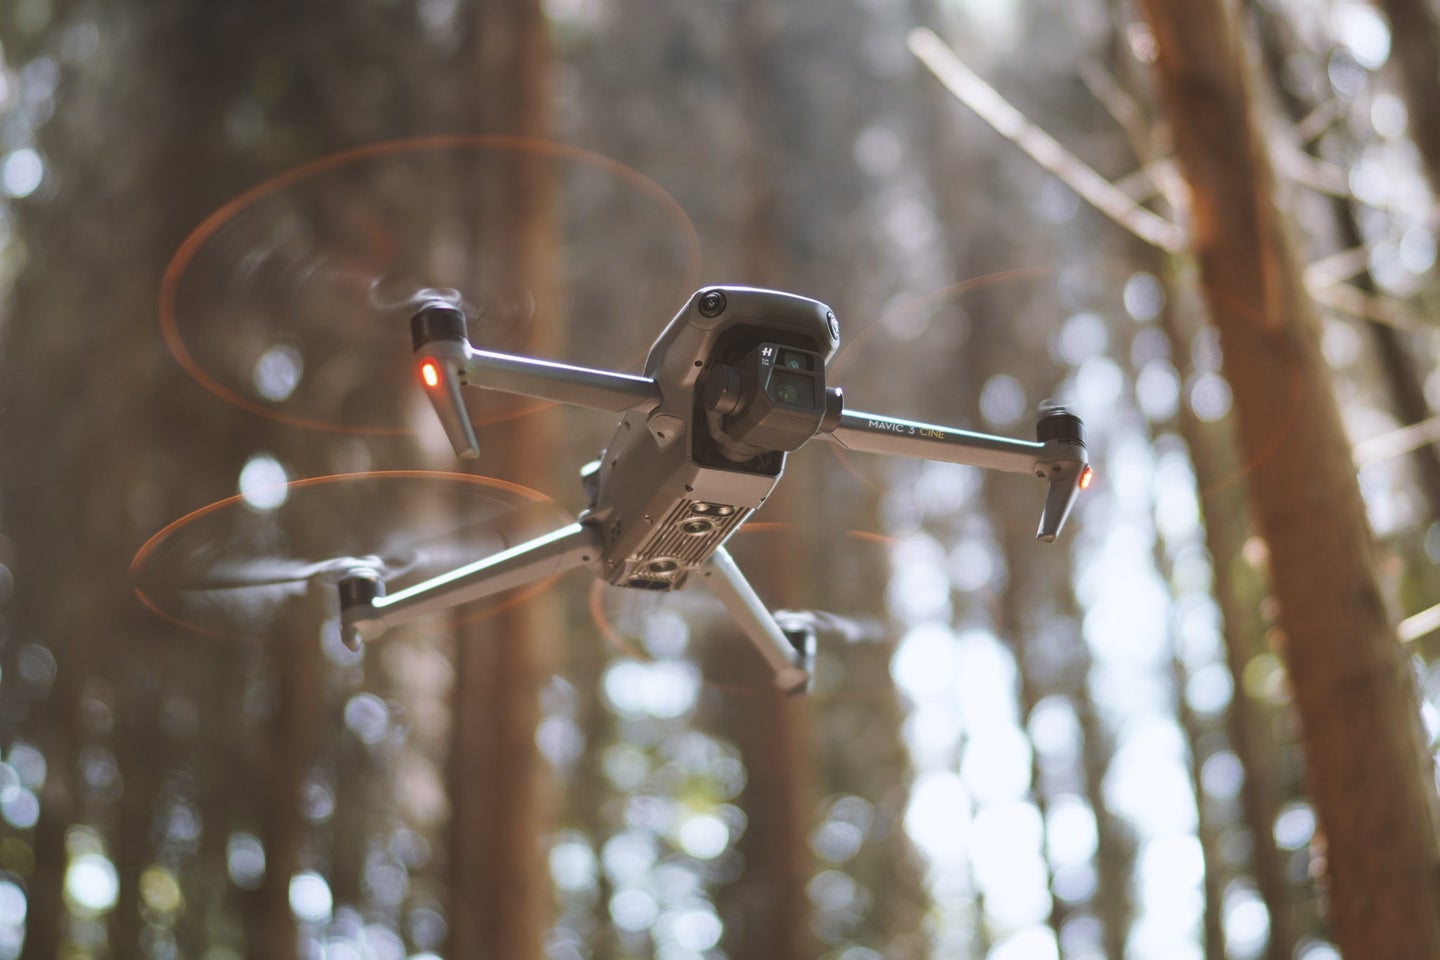 DJI drone flying in the forrest.